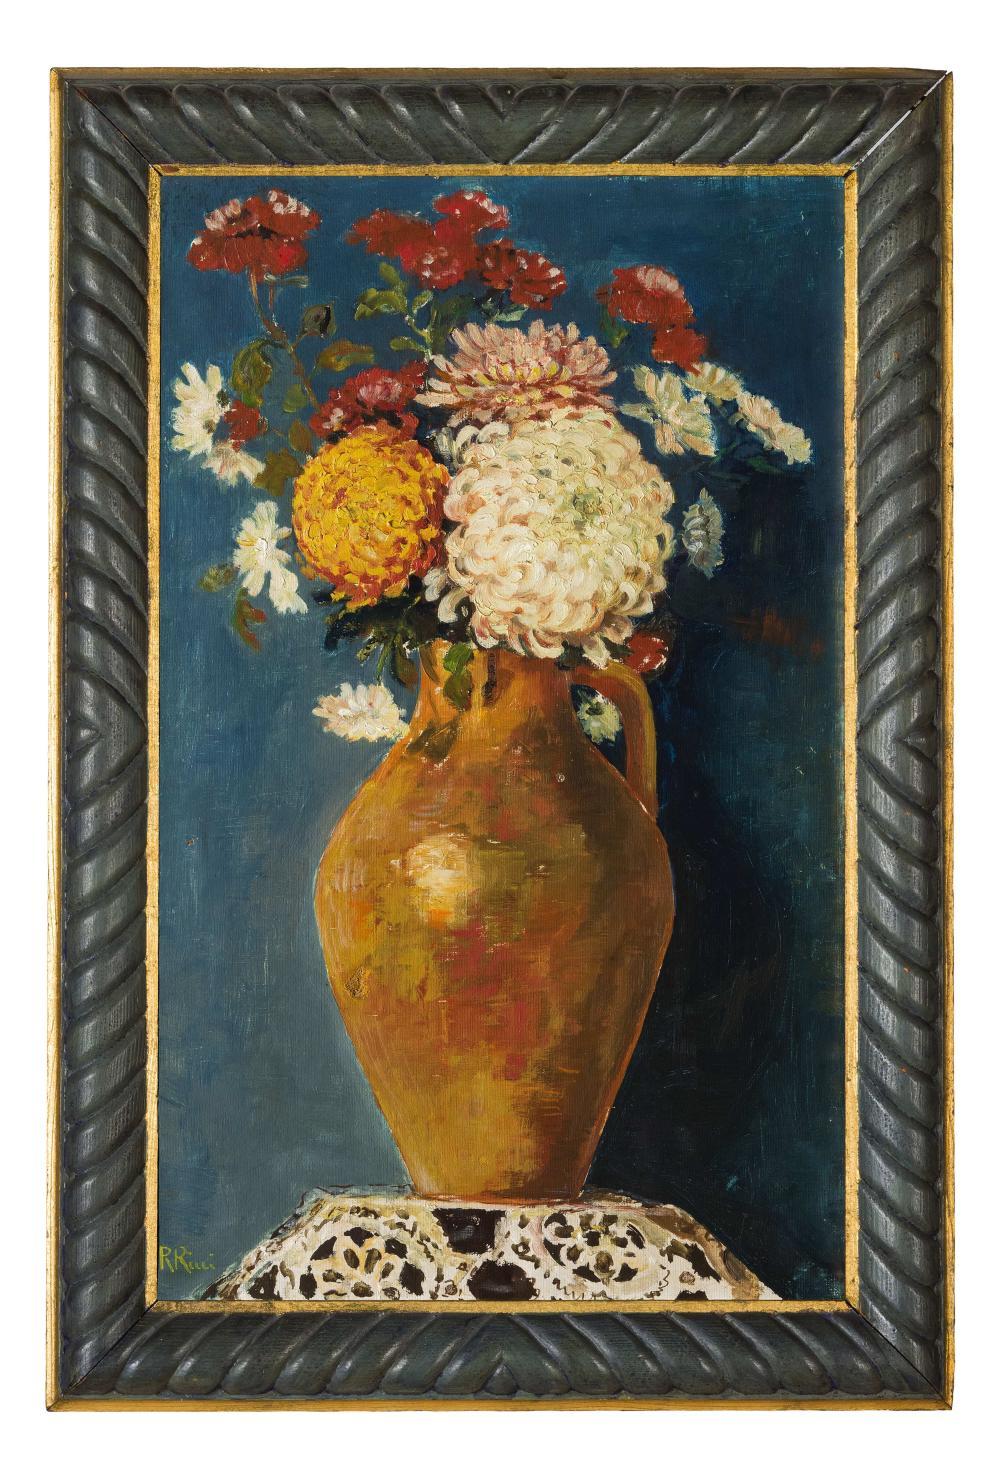 A pair of Italian still lifes with flowers, two flowers compositions, red flowers in a majolica vase and polychrome flowers in a pottery vase, oil on canvas paintings signed lower right and left R. Ricci, by the Italian artist Riccardo Ricci active